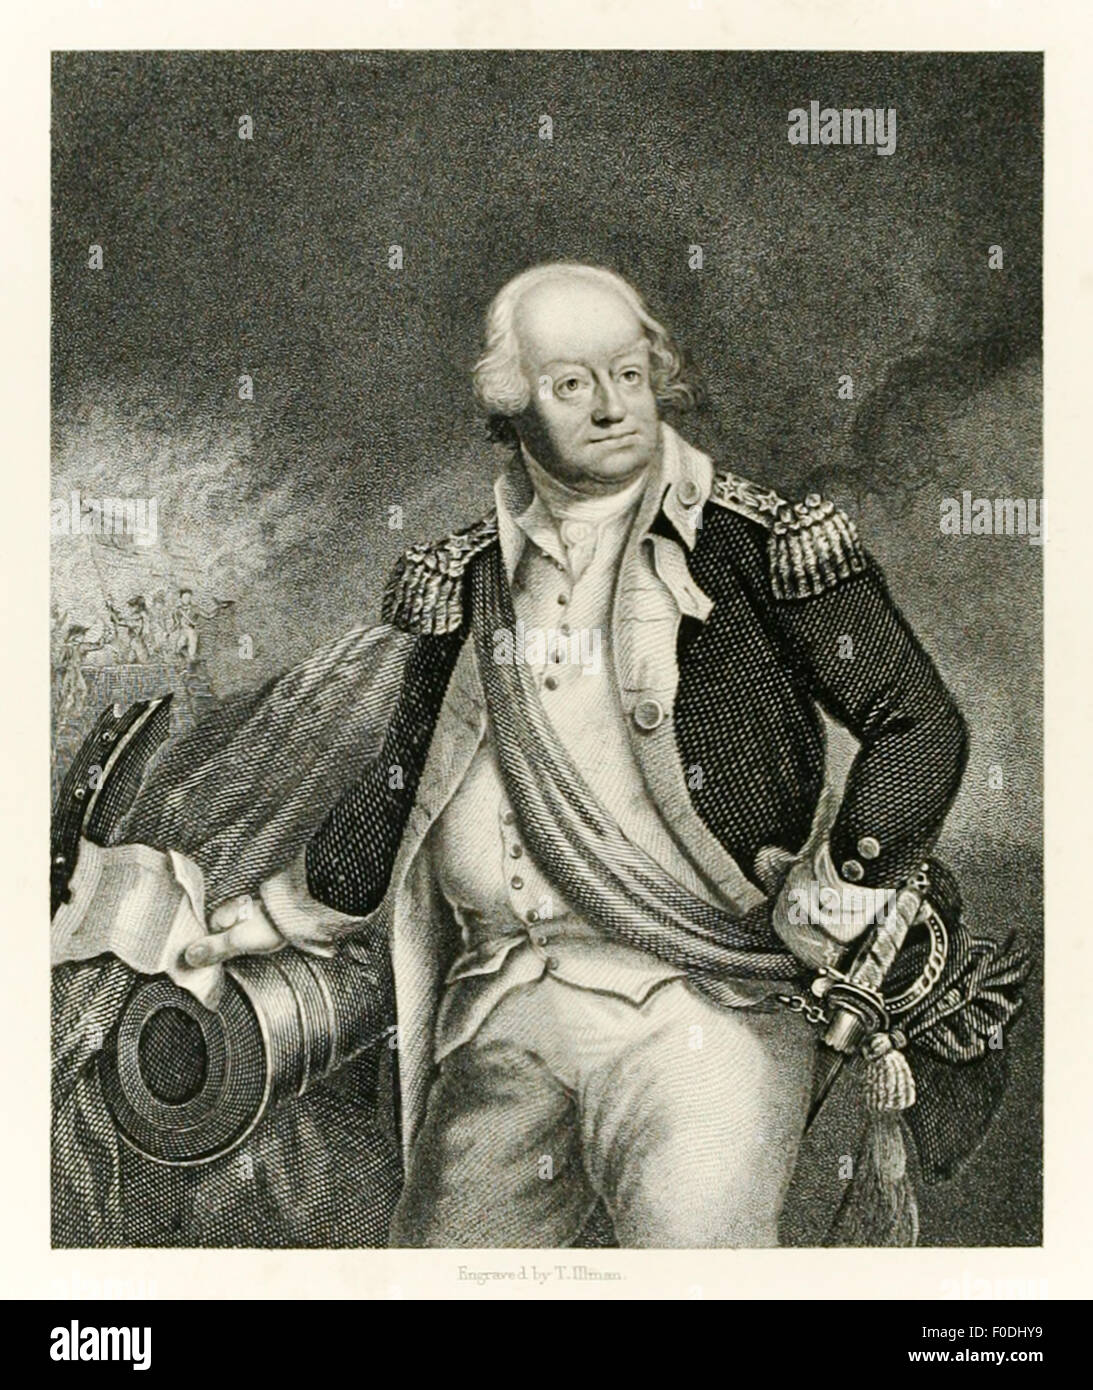 Major General Benjamin Lincoln (1733-1810) served in the Continental Army during the American War of Independence, notably surrendering during the Siege of Charleston in 1780. See description for more information. Stock Photo